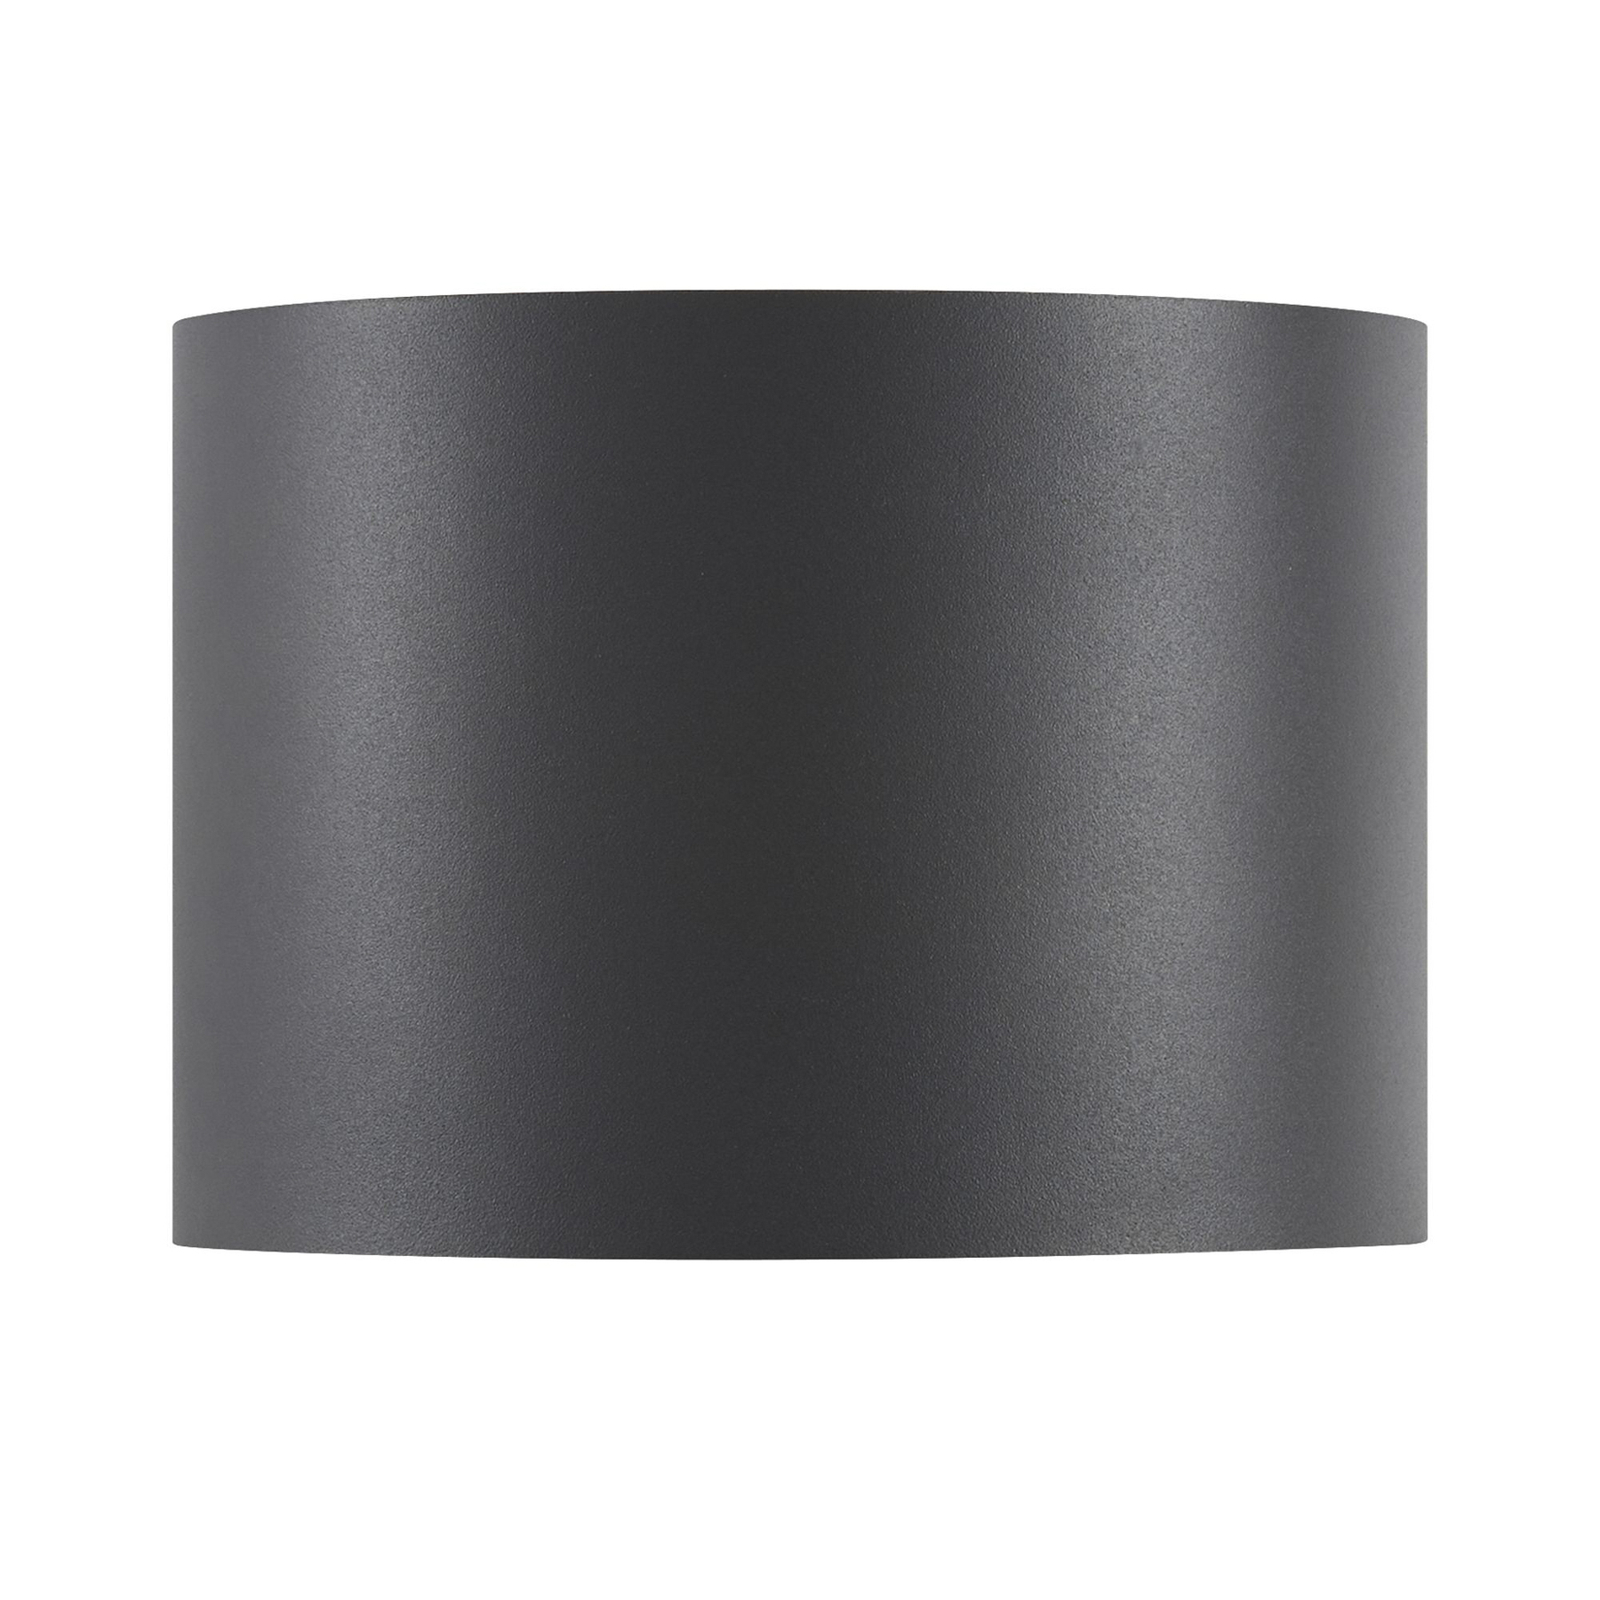 LED outdoor wall light Milda, anthracite, up/down, aluminium